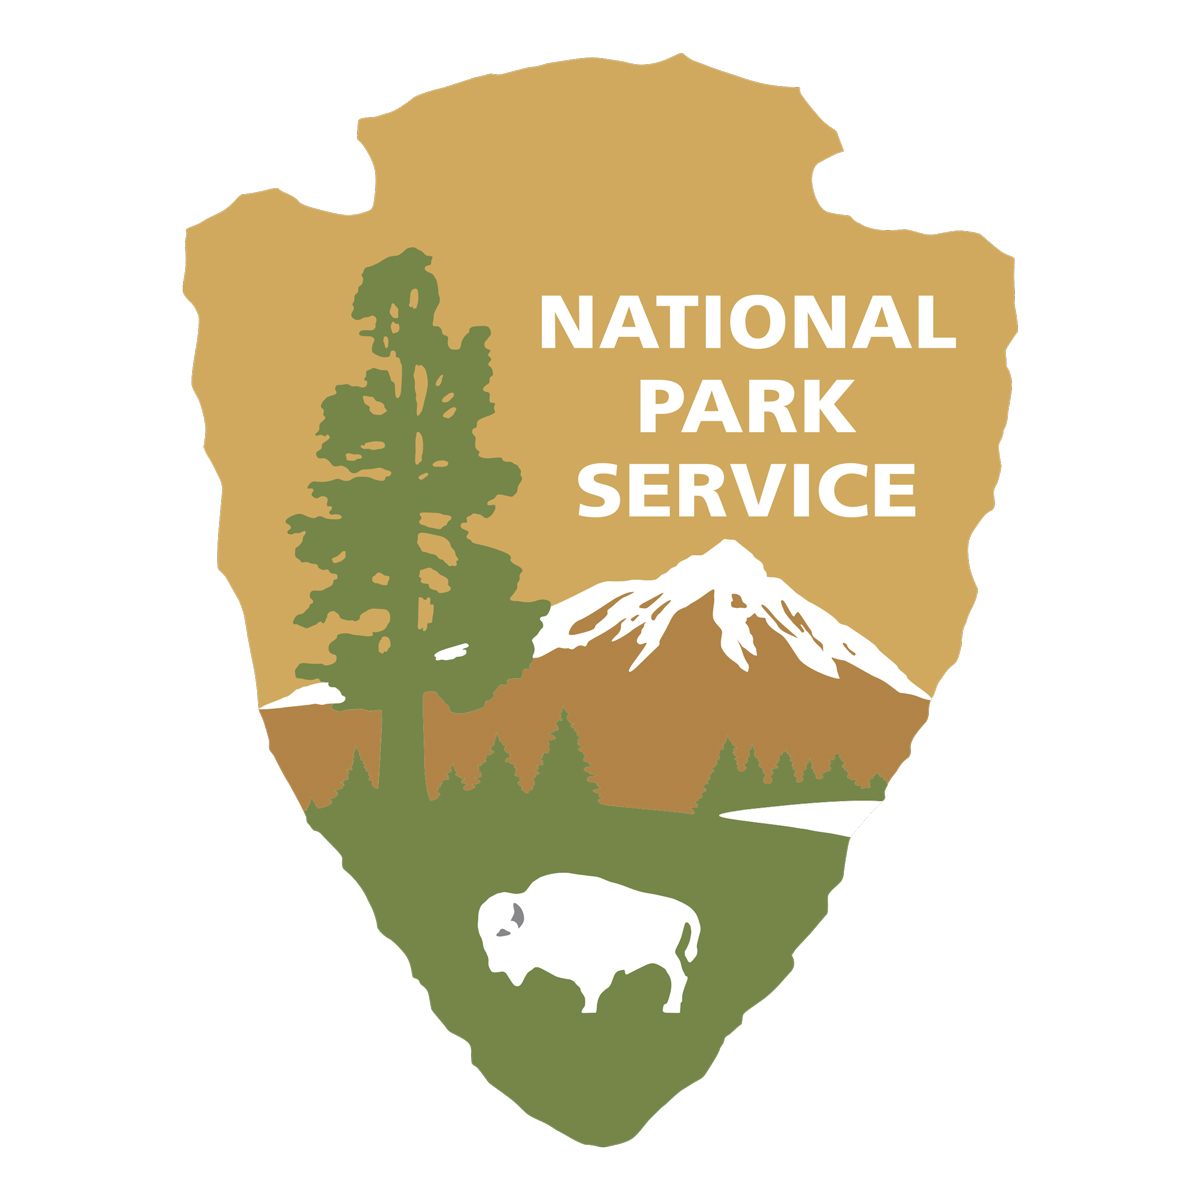 National Park Pass, prices and passes vary, nps.gov